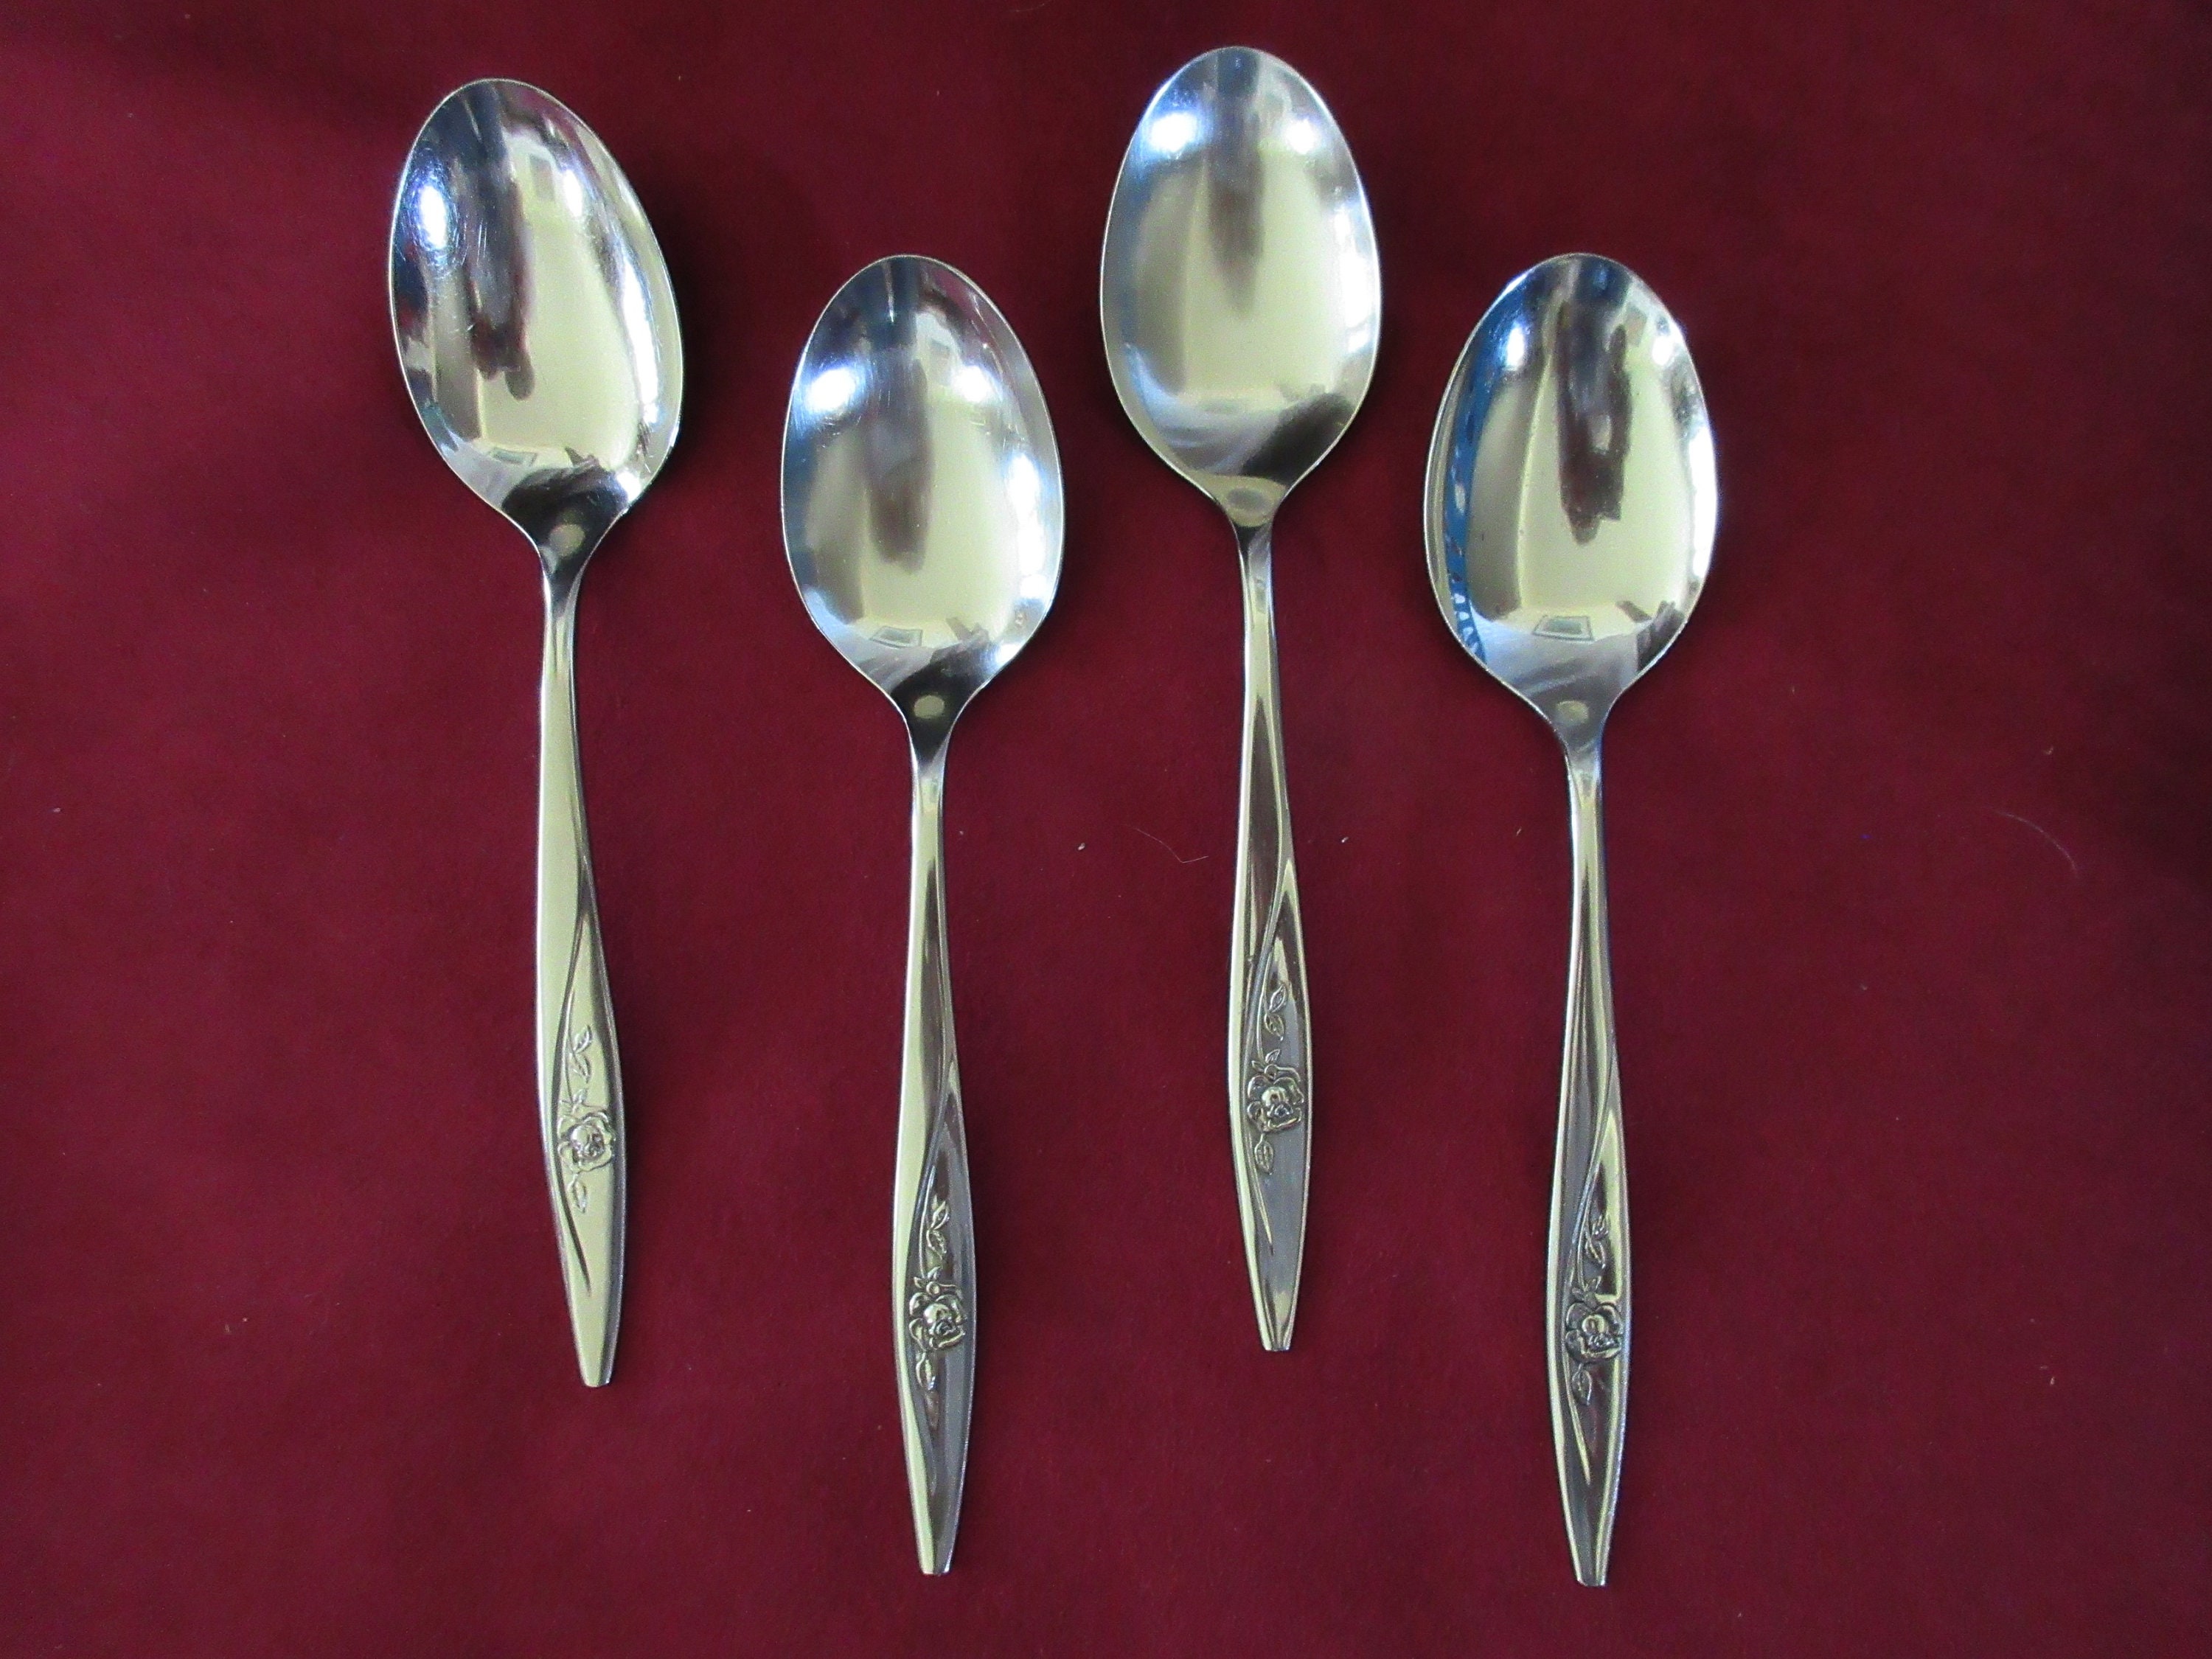 Stainless 4 1/4 Toddler Baby SPOON Oneidacraft Deluxe LASTING ROSE Pattern  Good Condition!